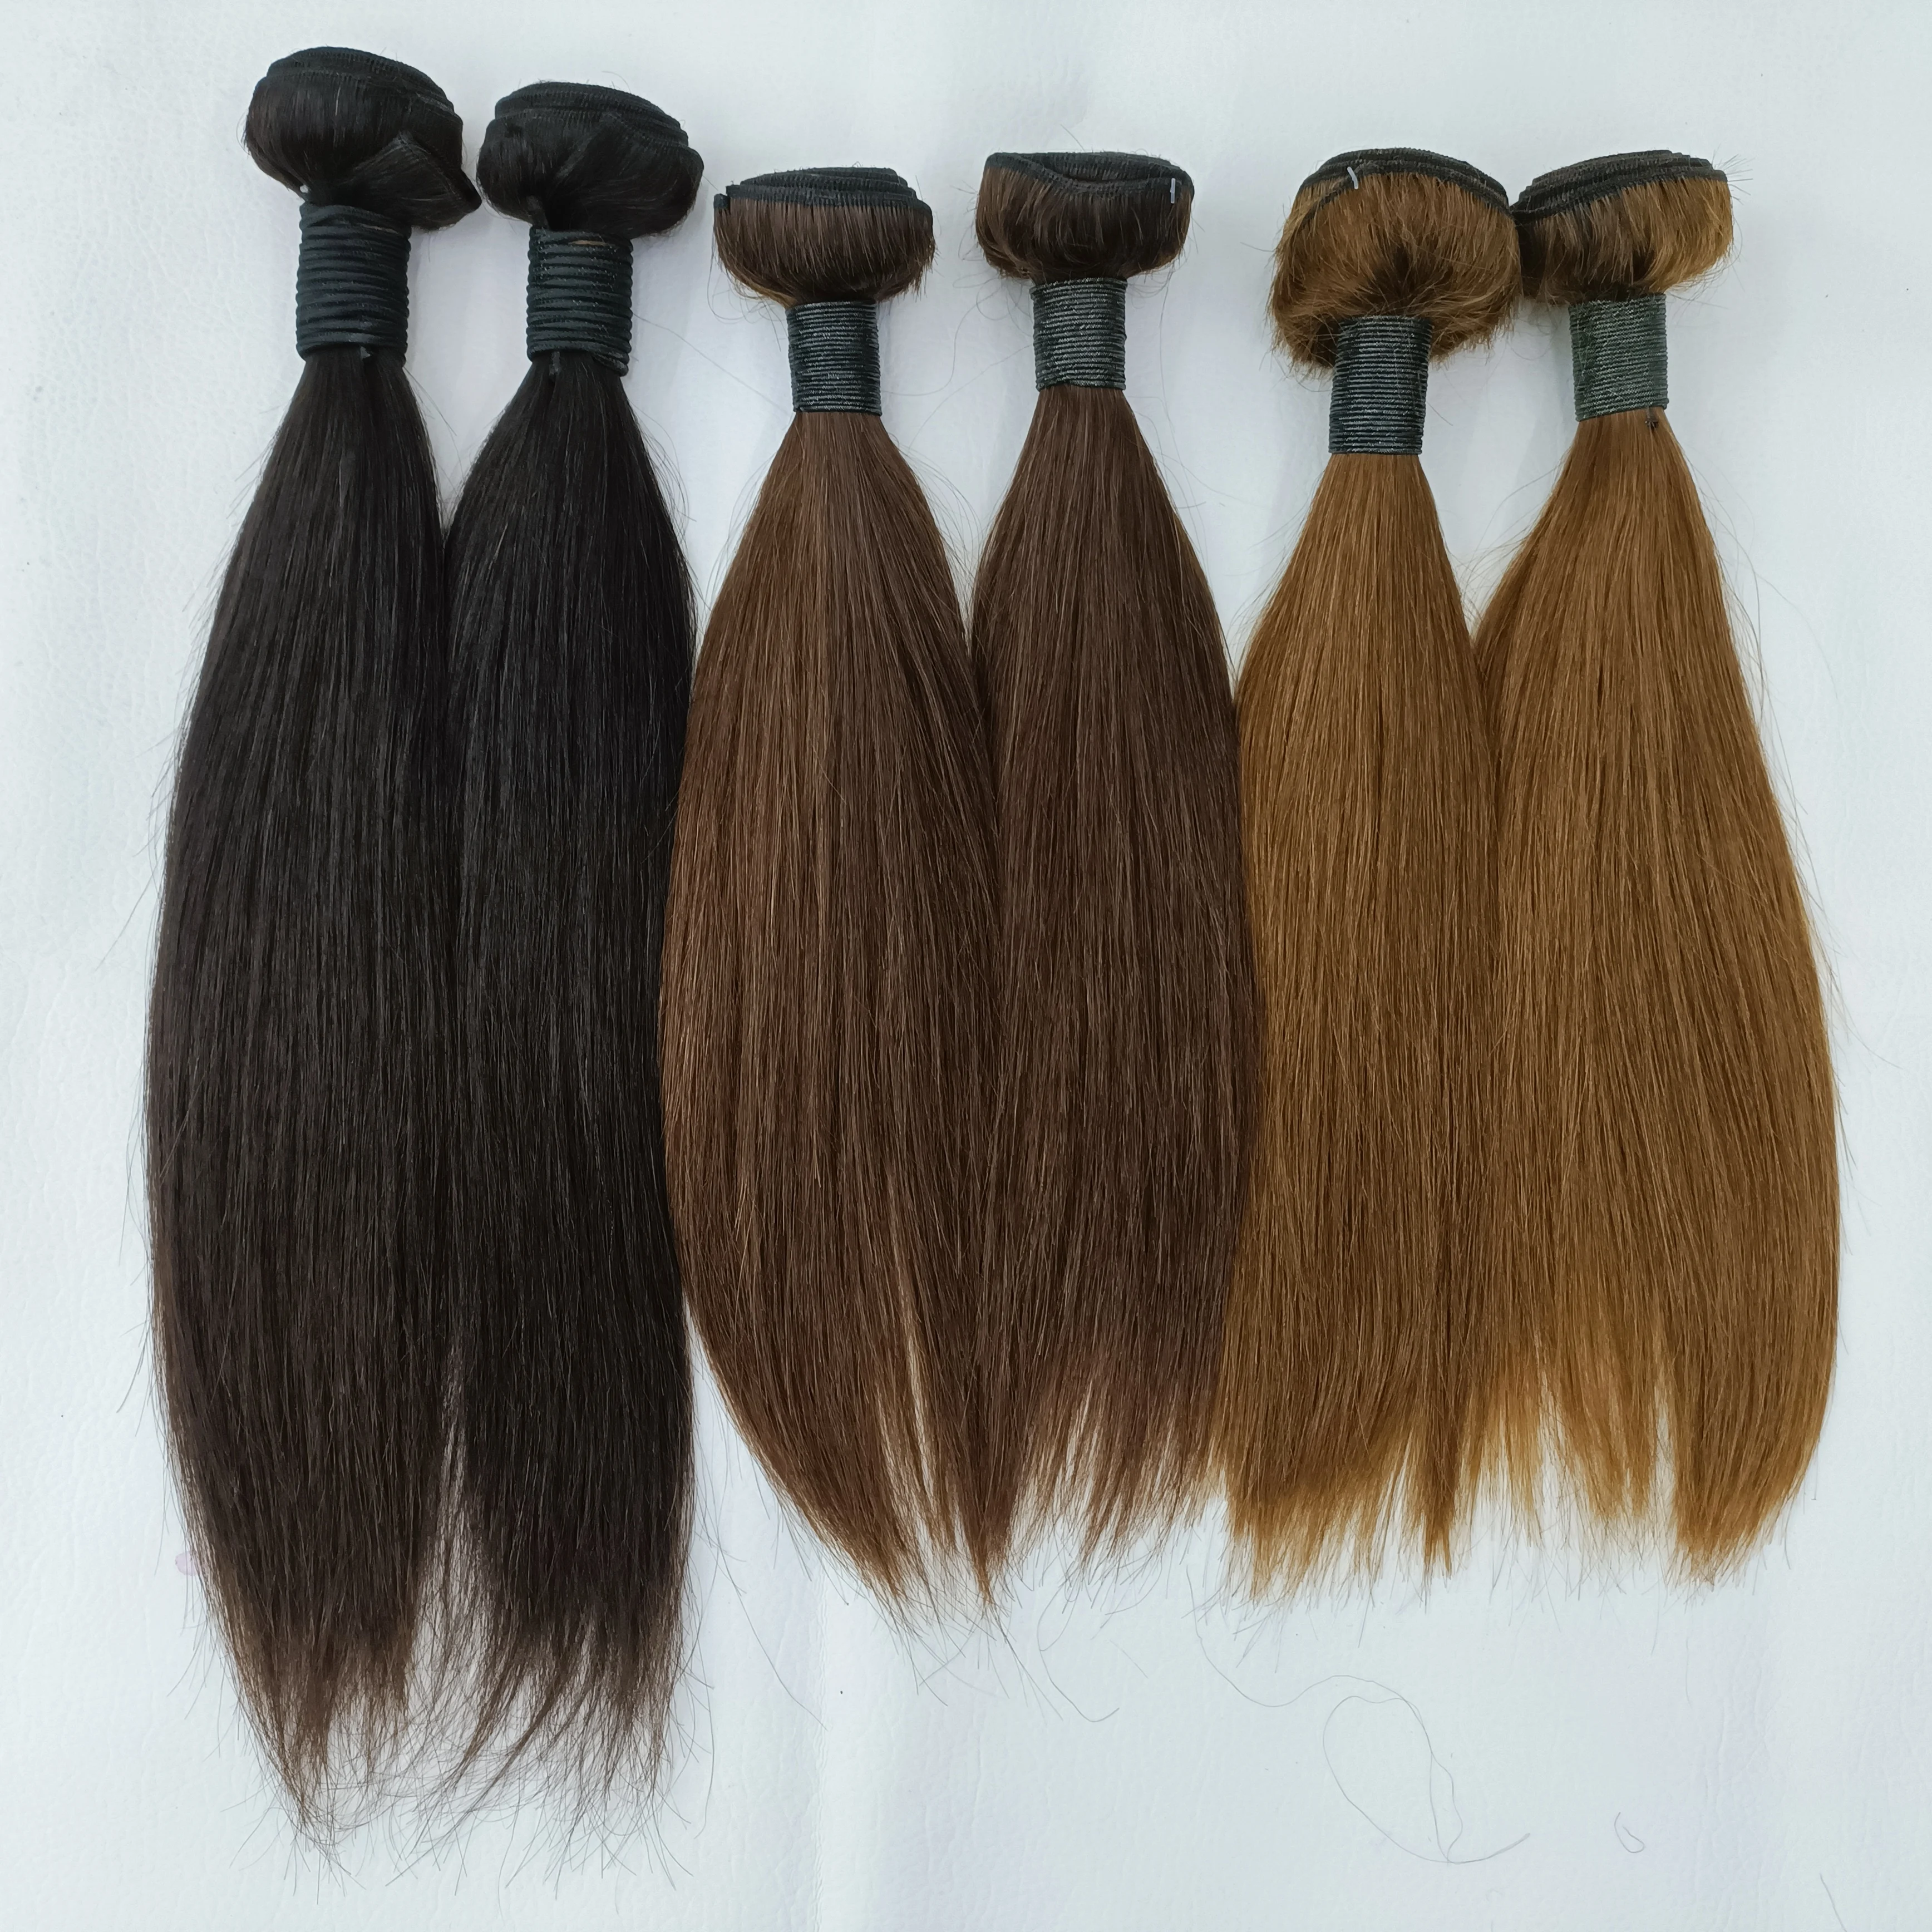 

Letsfly New Arrival Straight 10A Mix Brown, Dark Brown, Gold Brown Virgin Cuticle Aligned Human Hair Weave Free Shipping